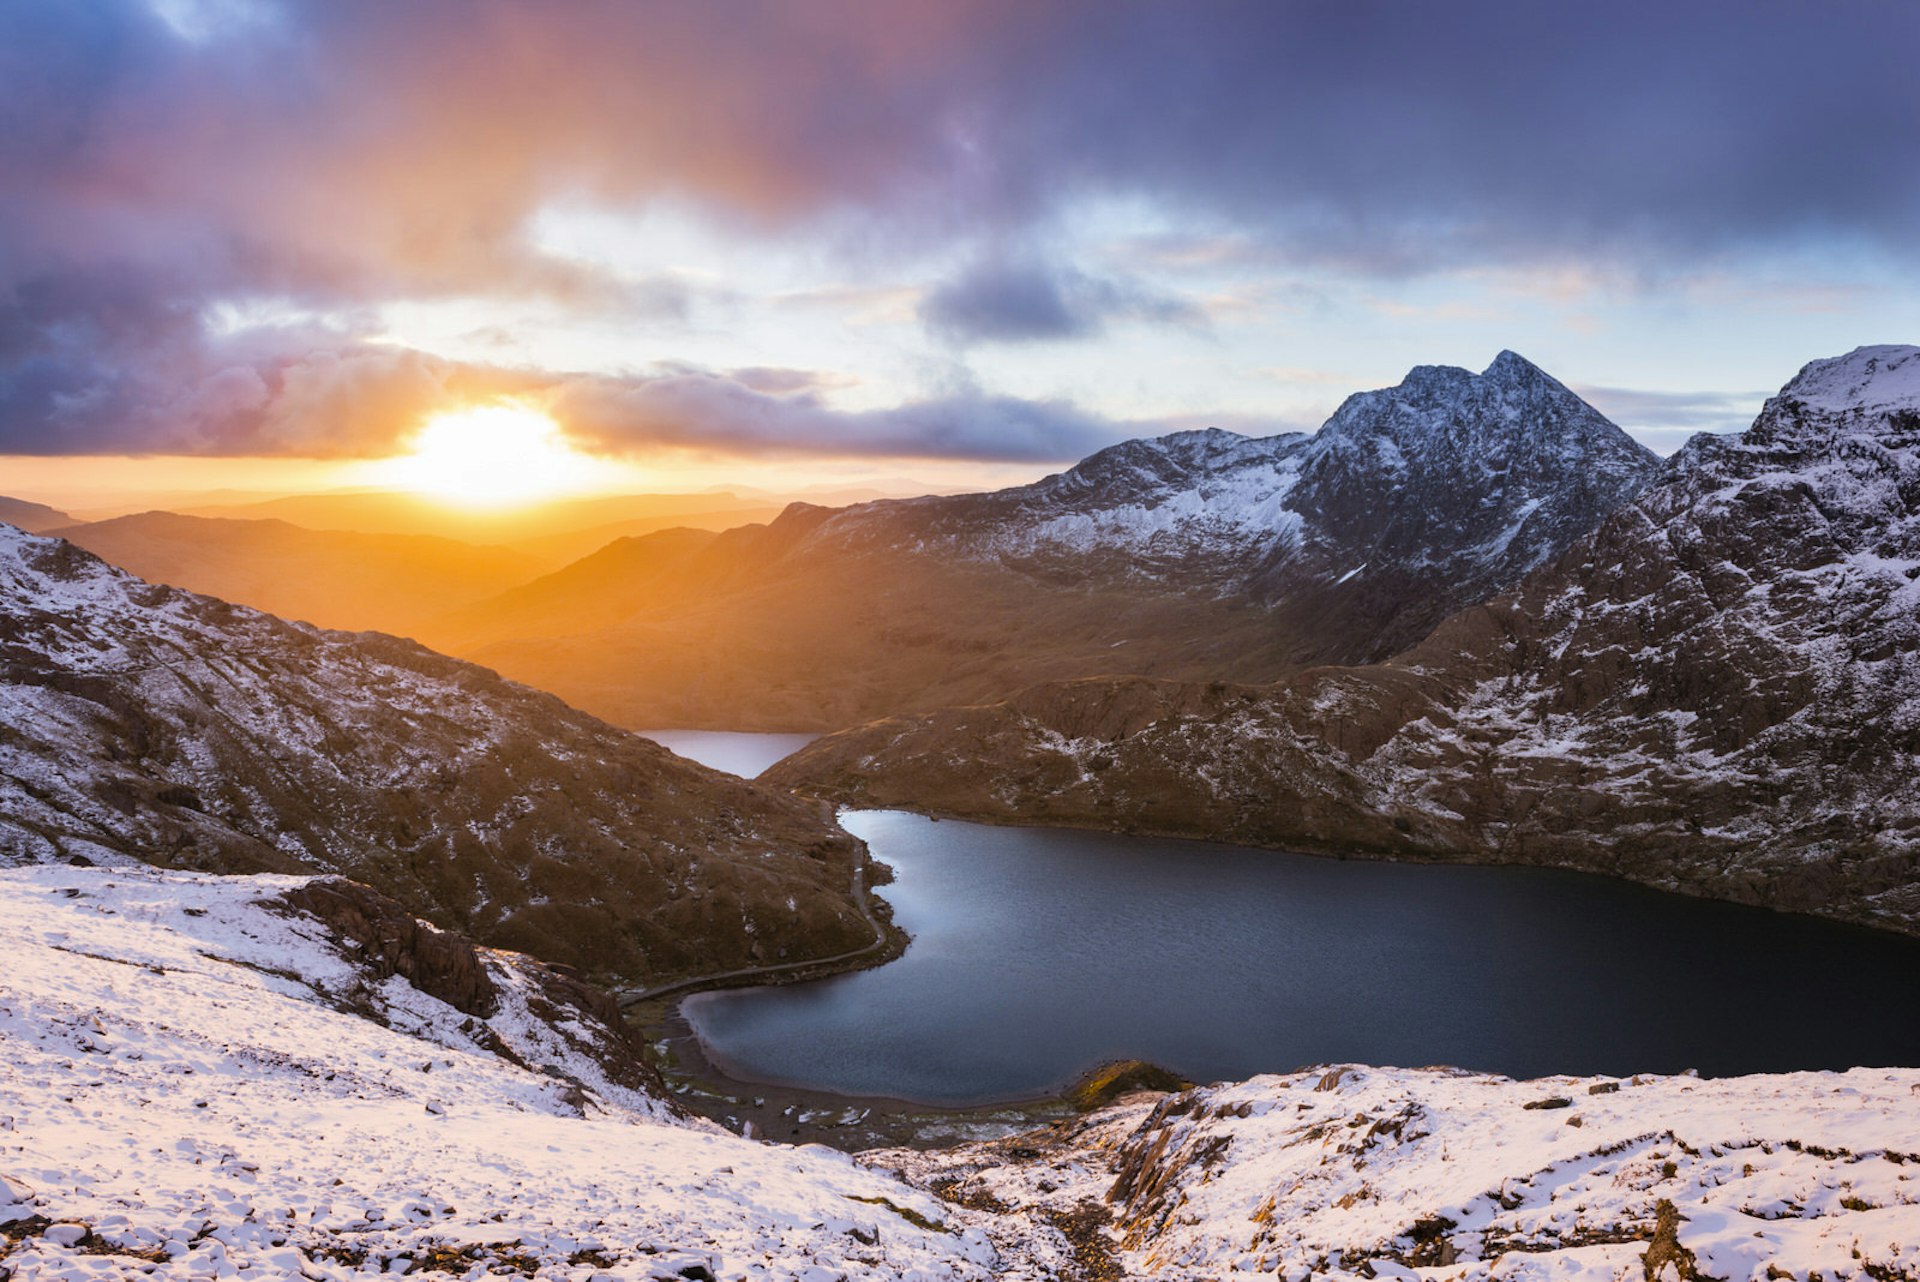 The mountain of Y Lliwedd at sunrise – a training spot for George Mallory and the 1953 British Mount Everest expedition © Justin Foulkes / Lonely Planet